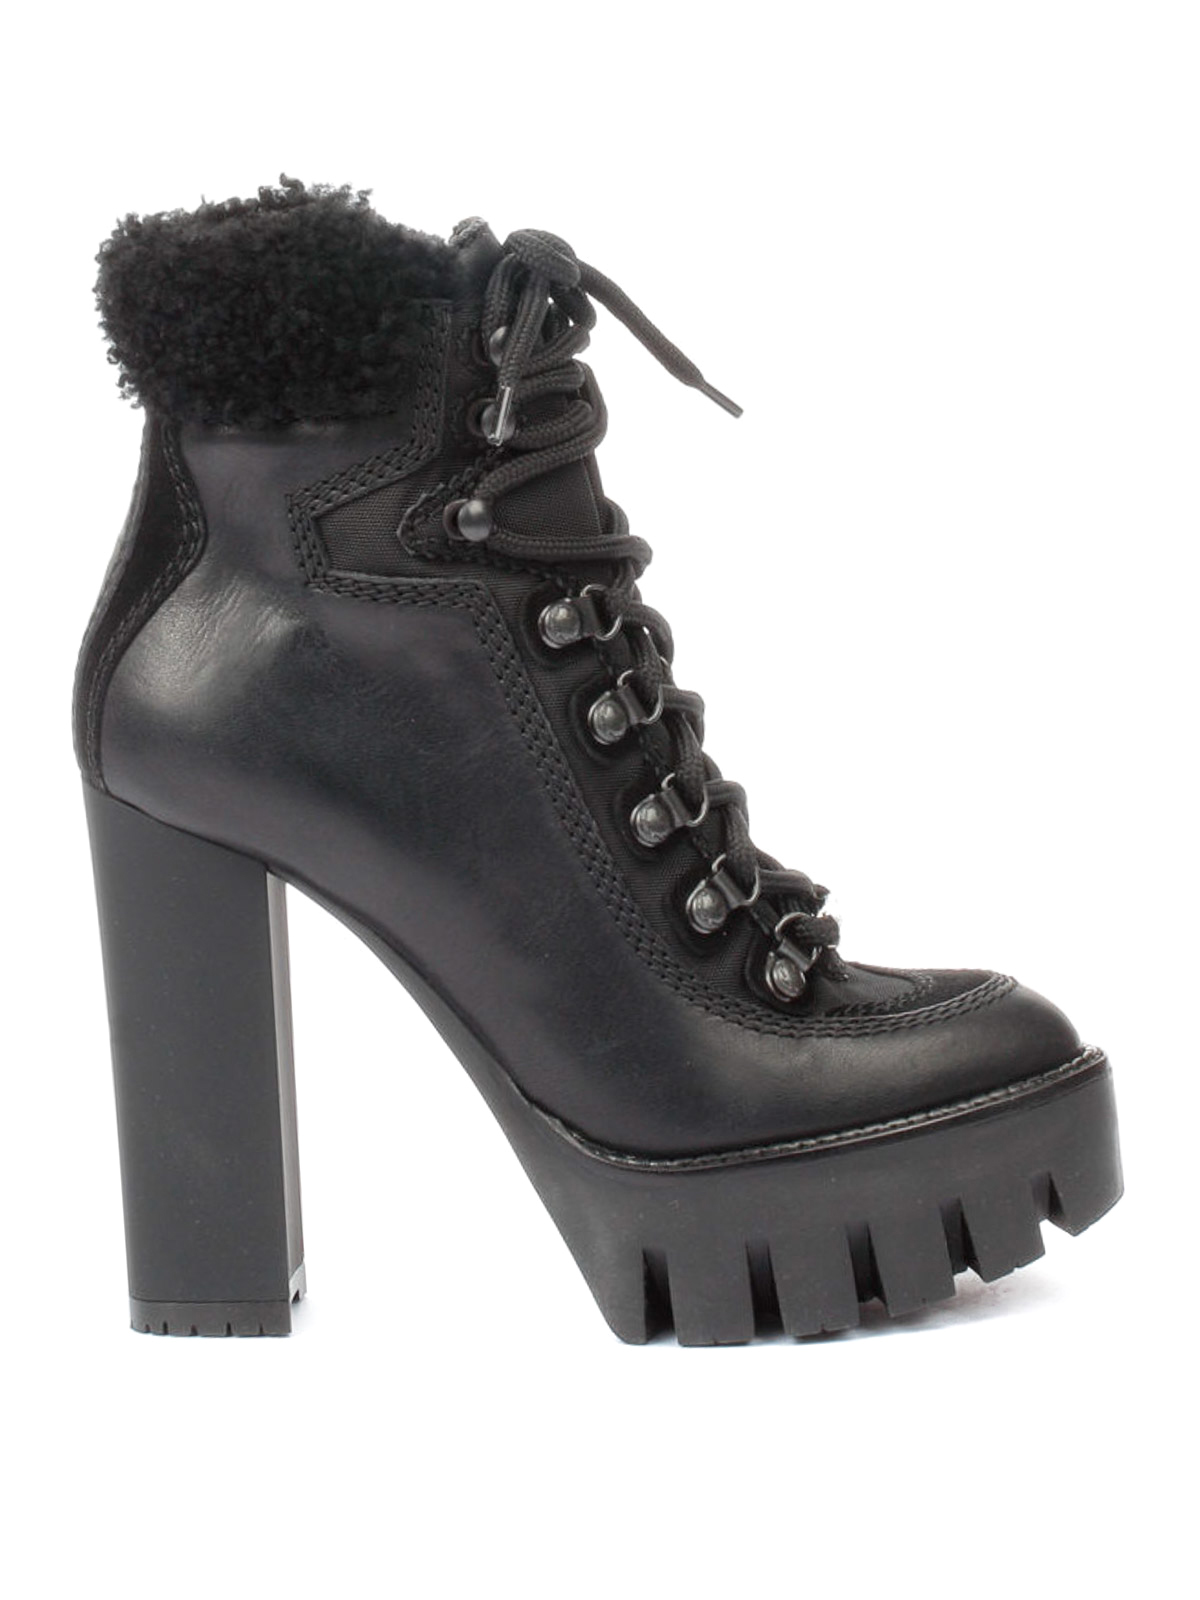 dsquared2 lace up heels